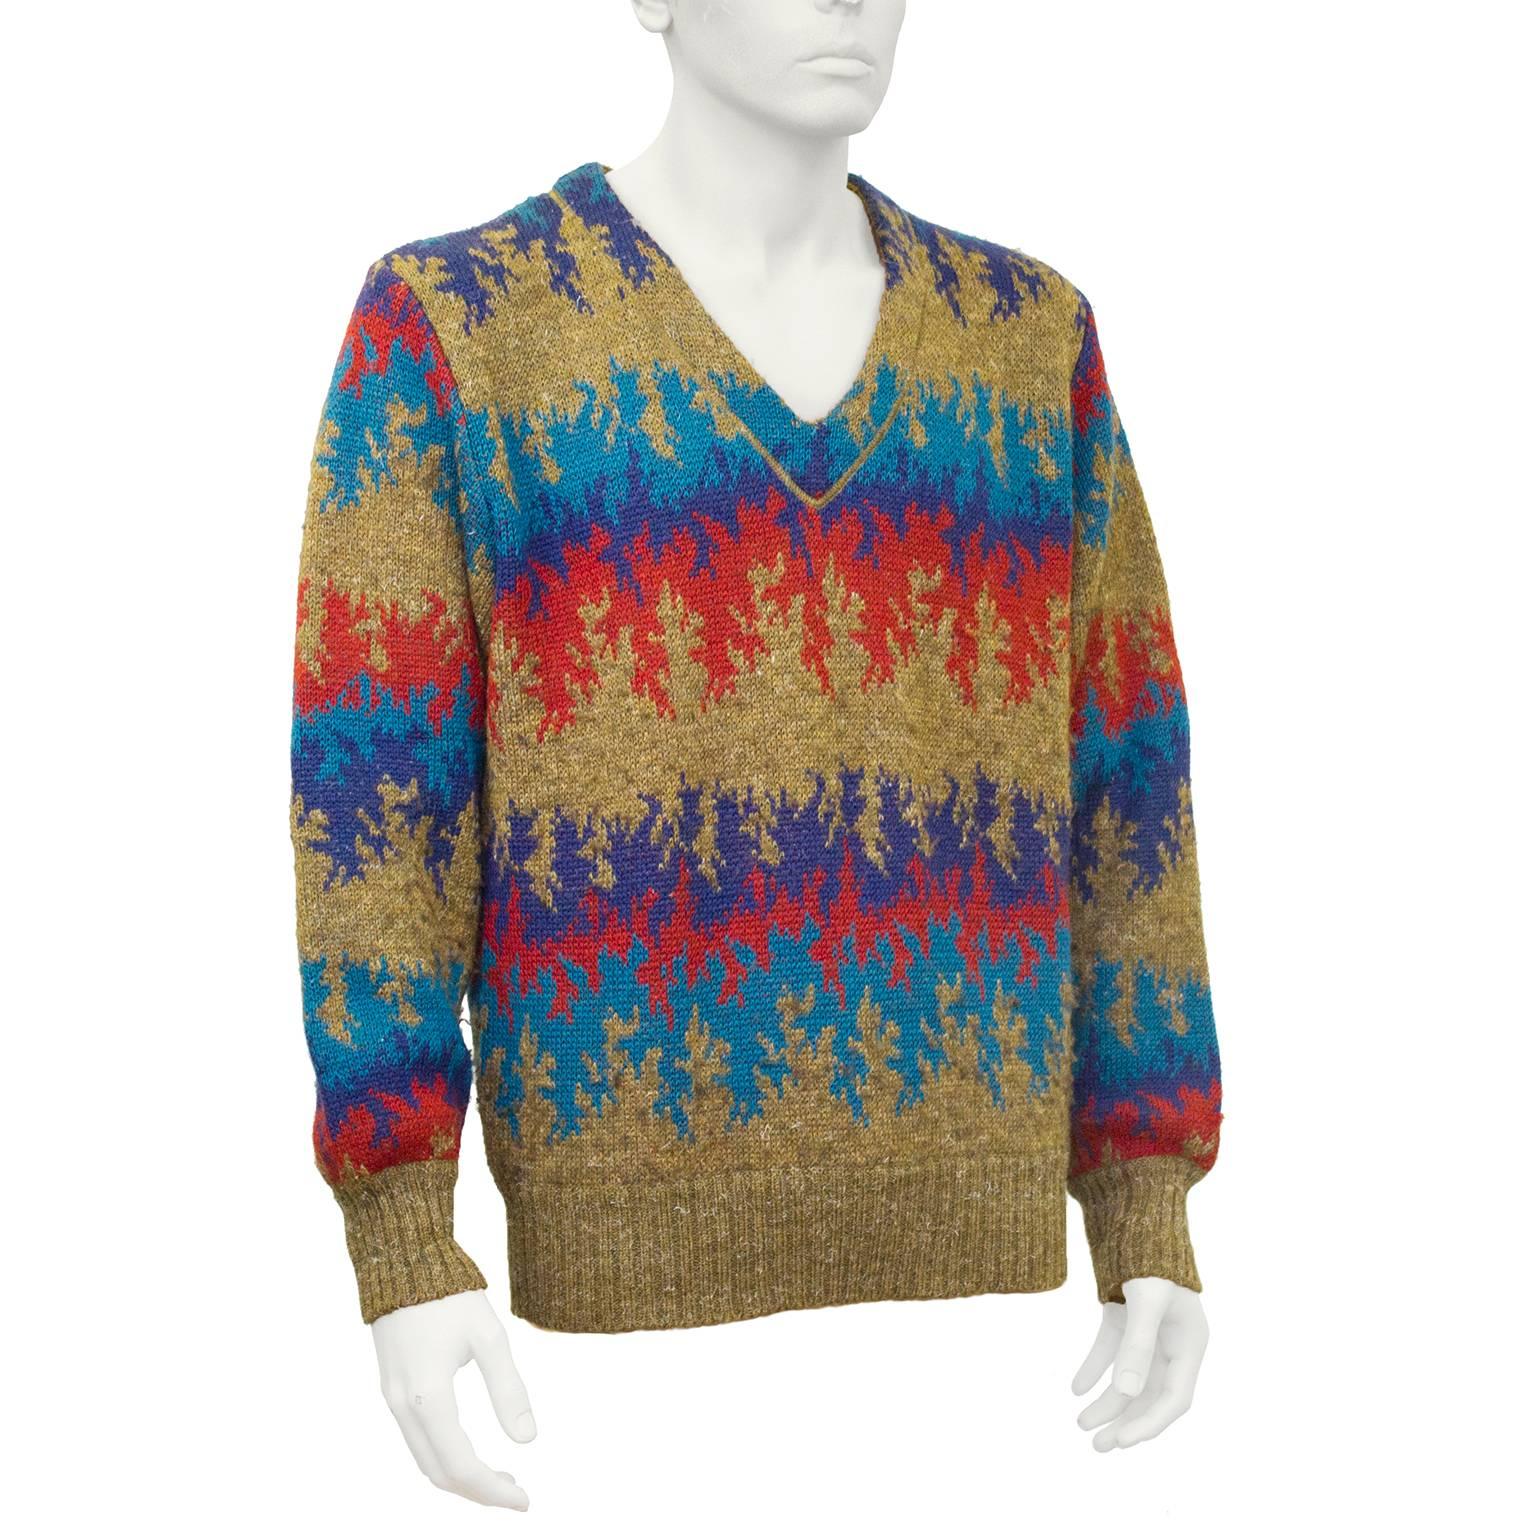 1970's Missoni mens V neck sweater in classic flame chevron pattern. Rich tobacco, blue, turquoise  and red wool and alpaca knit. Fits like a mens S-M and a ladies US 8-10. Excellent condition.

Sleeve 23